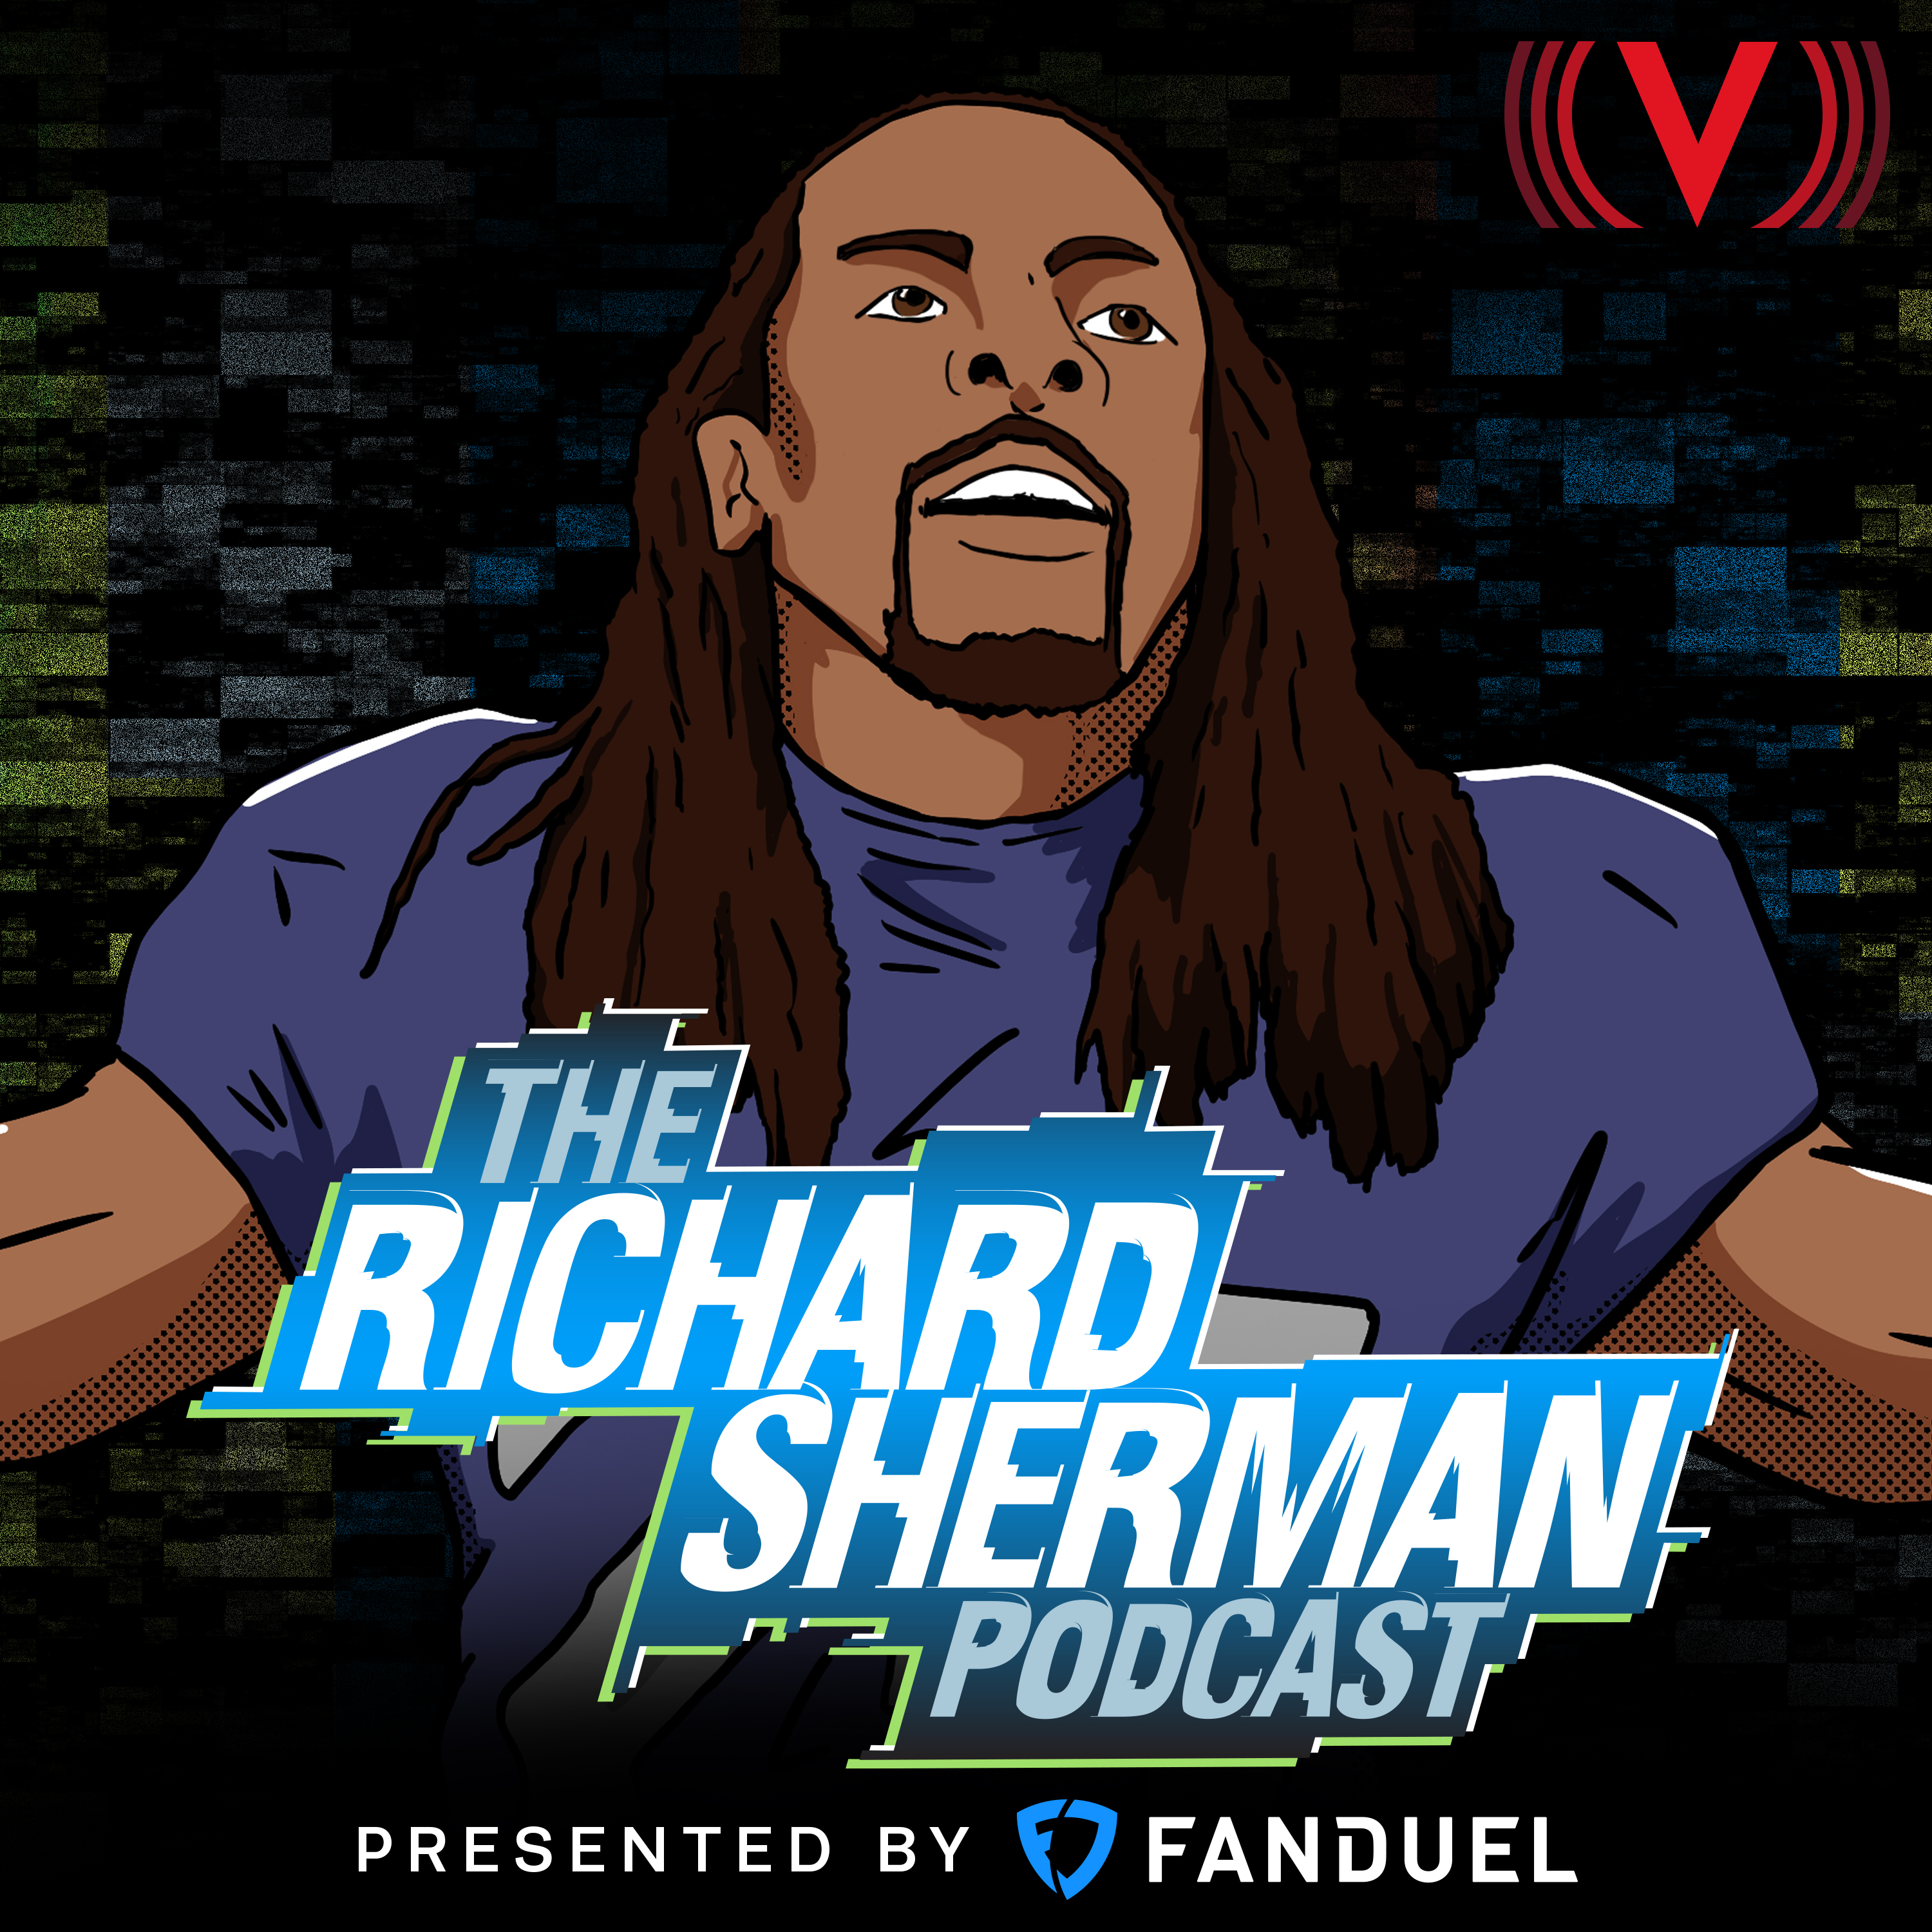 The Richard Sherman Podcast - 49ers-Eagles & Bengals-Chiefs Predictions + Deommodore Lenoir on Cowboys-49ers, Micah Parsons' callout & facing Eagles